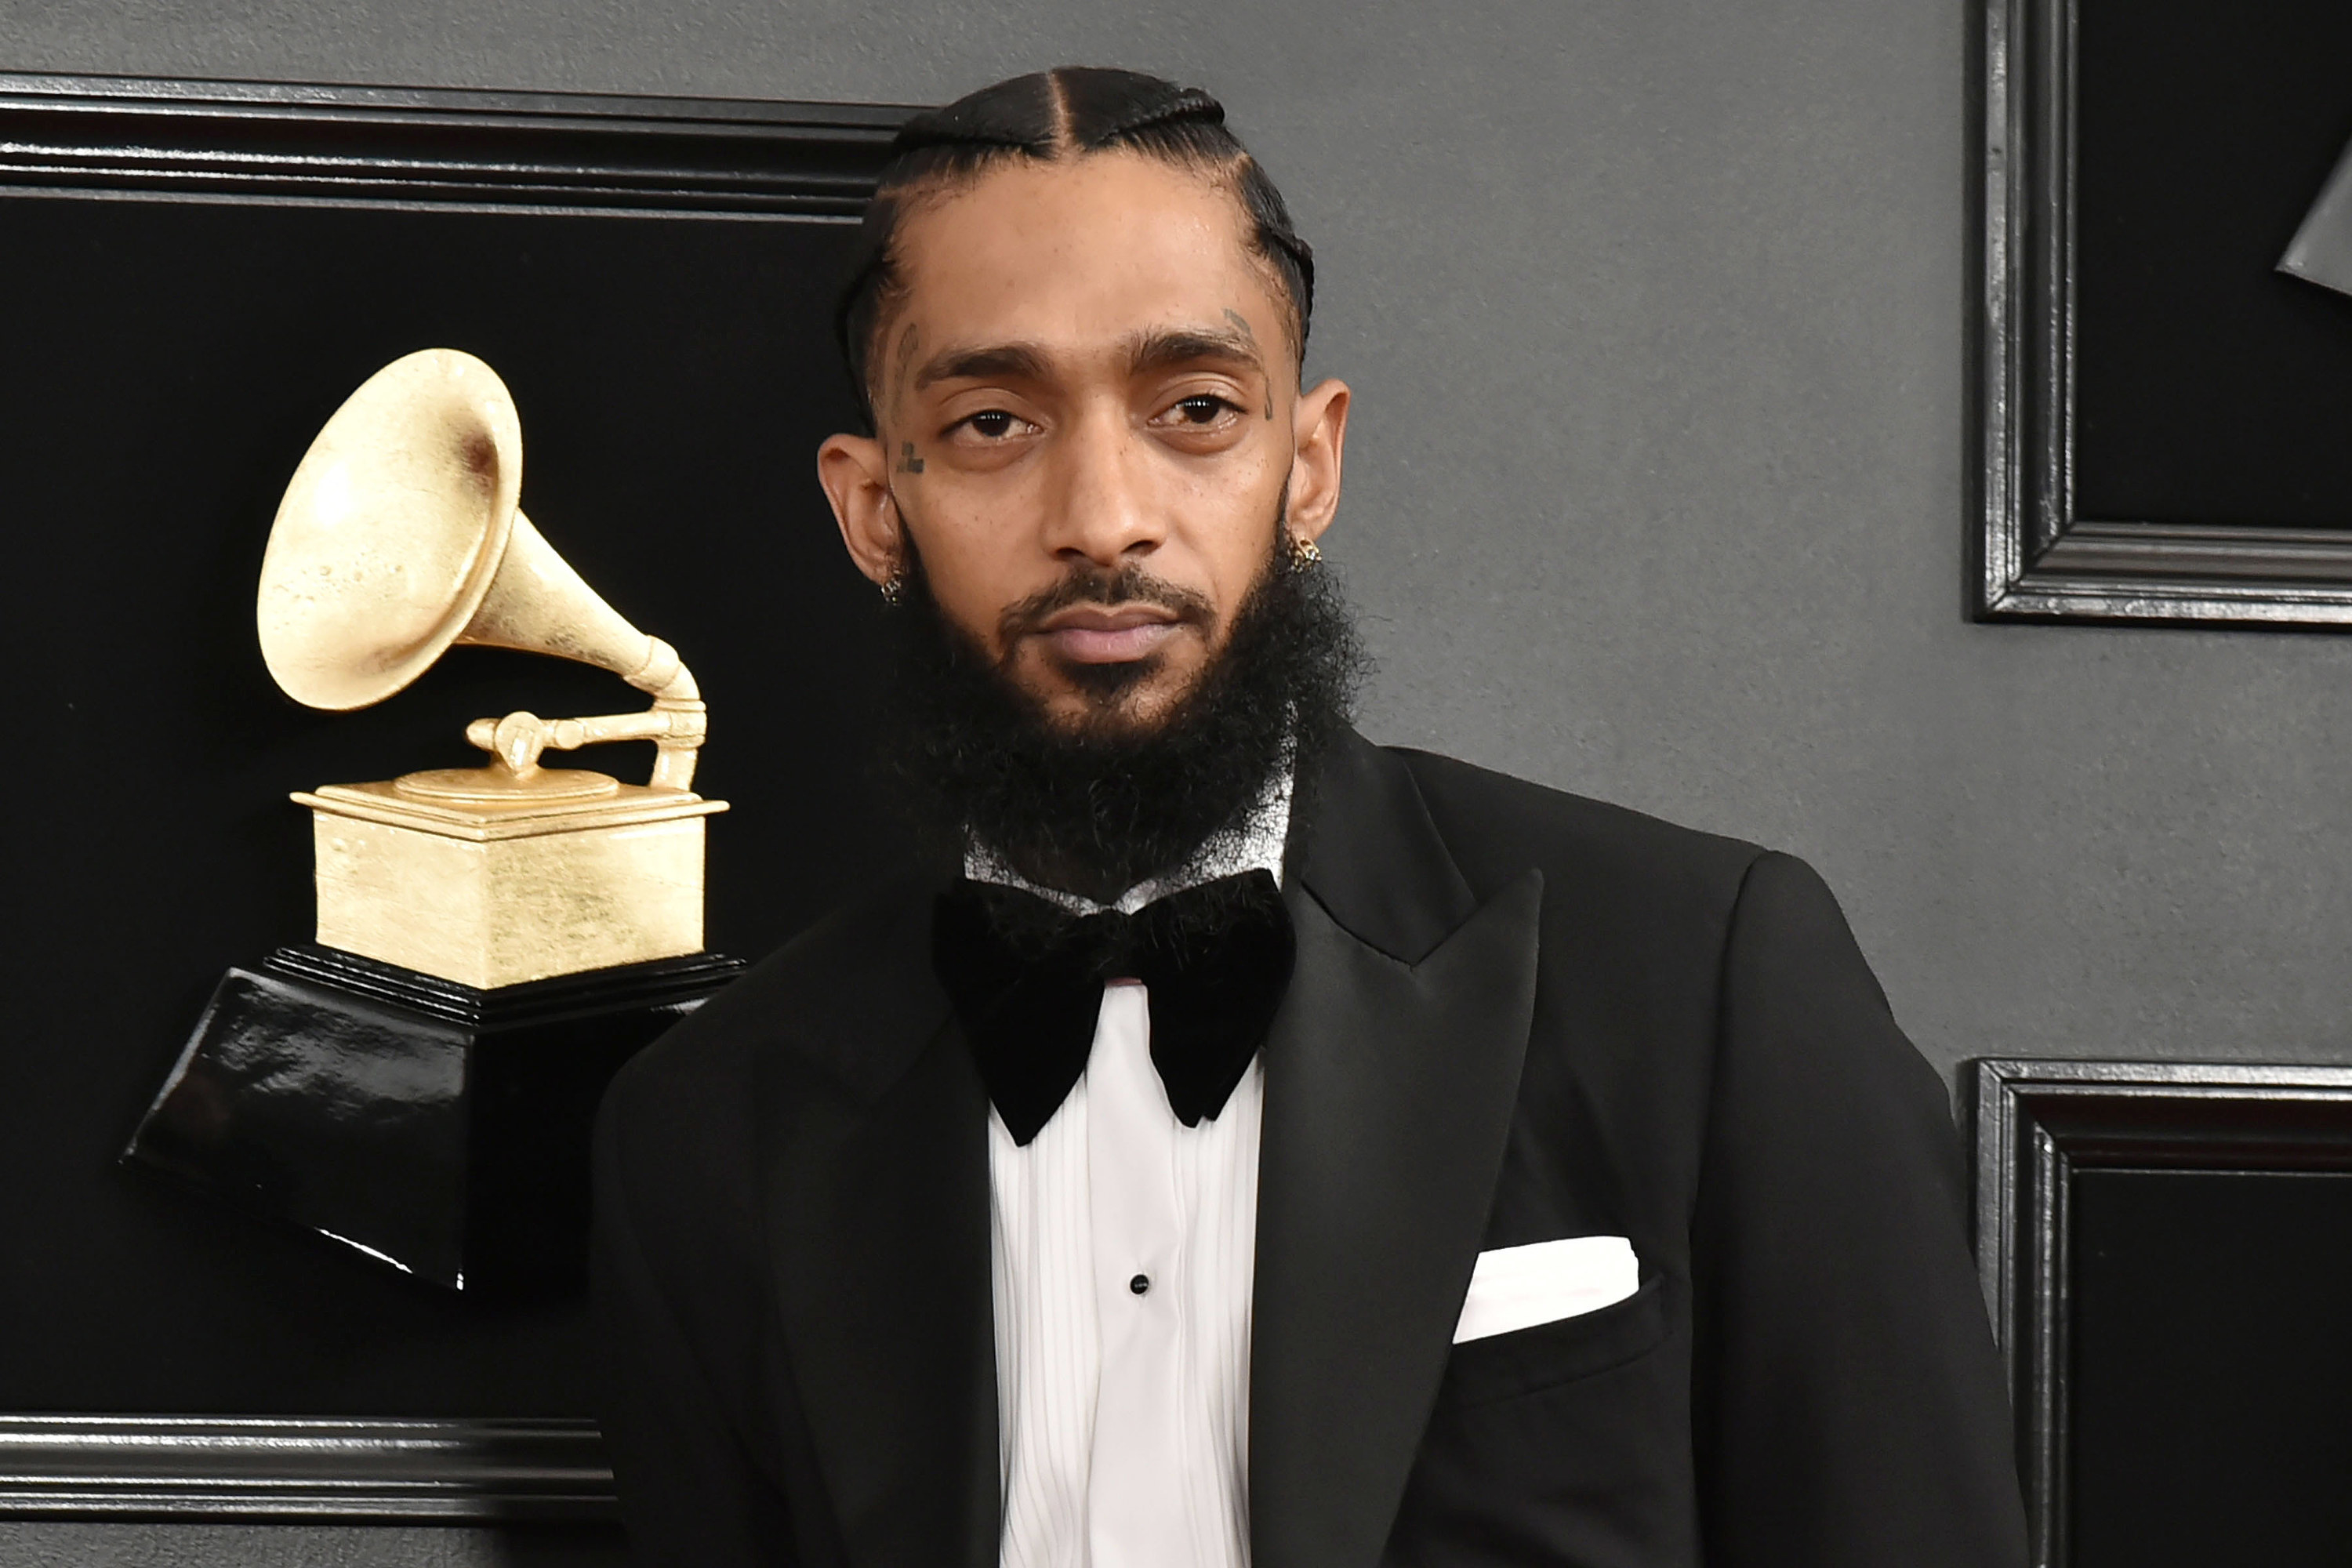 Nipsey Hussle wears a tuxedo and poses elegantly at an event.